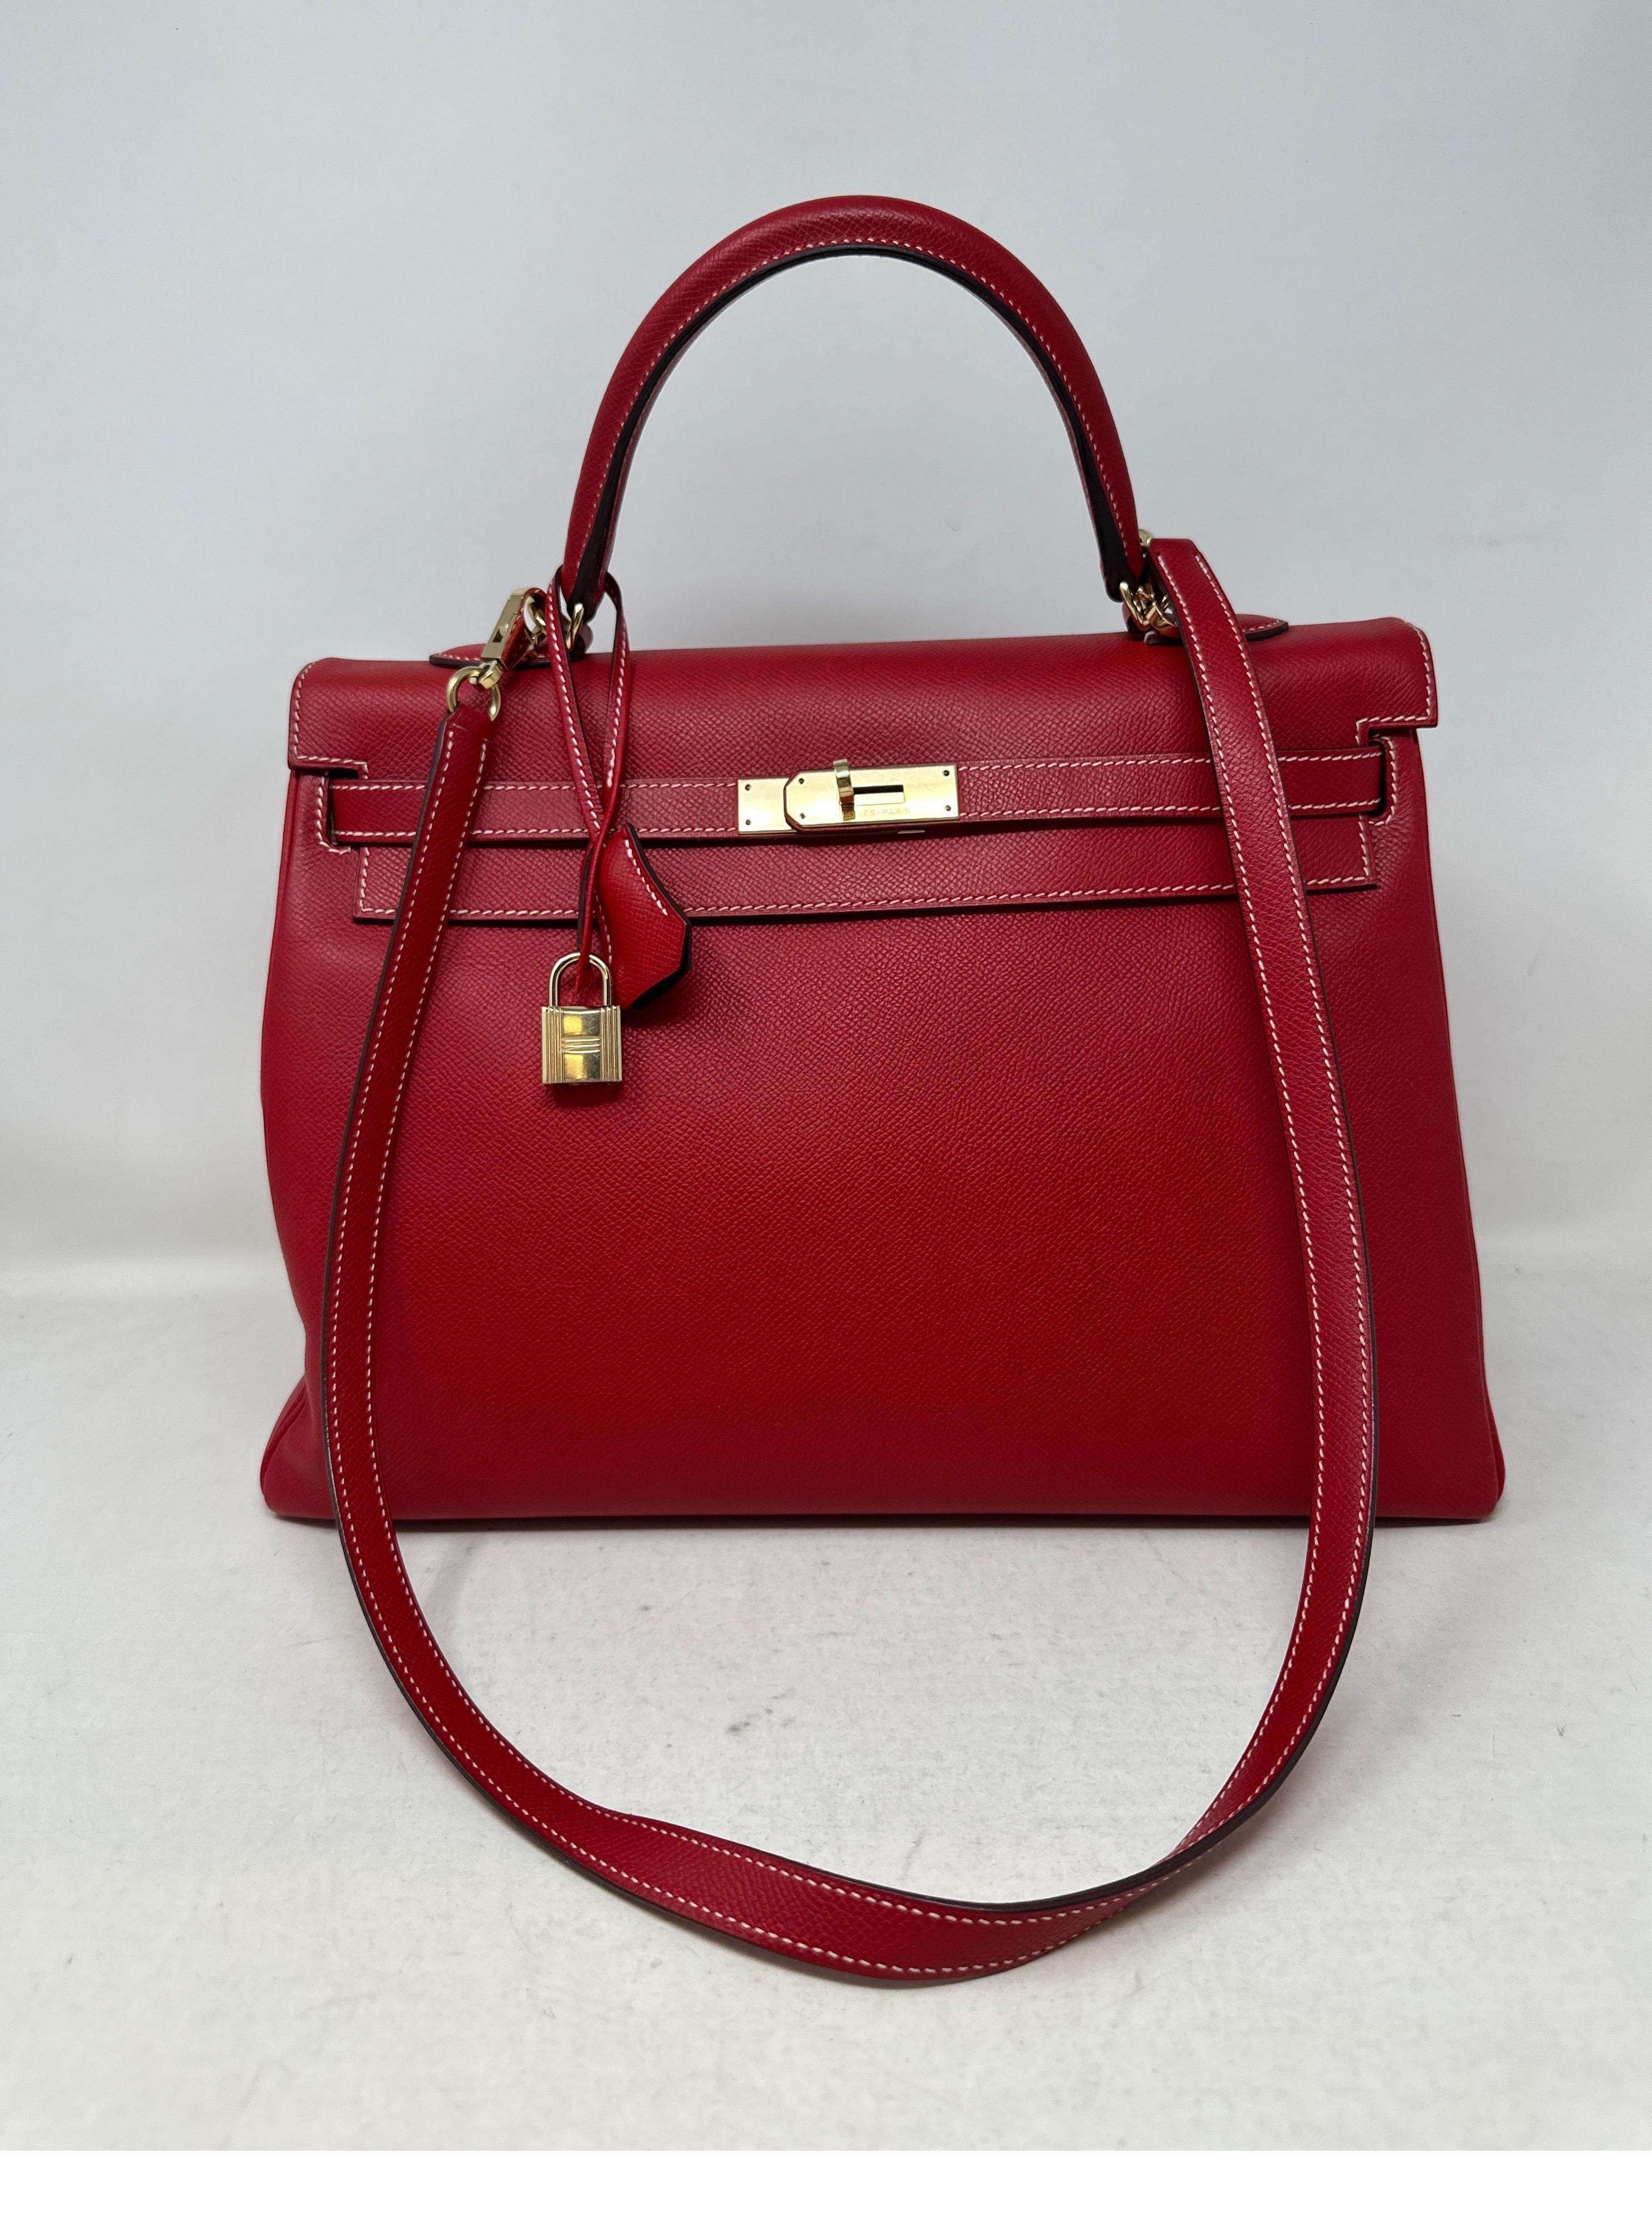 Hermes Rouge Casque Kelly 35 Bag. Candy interior with bue mykonos leather. Gold hardware. Excellent condition. Still has plastic on hardware. Priced to sell. Beautiful color red and rare blue interior. Kelly bags are hot right now. Includes